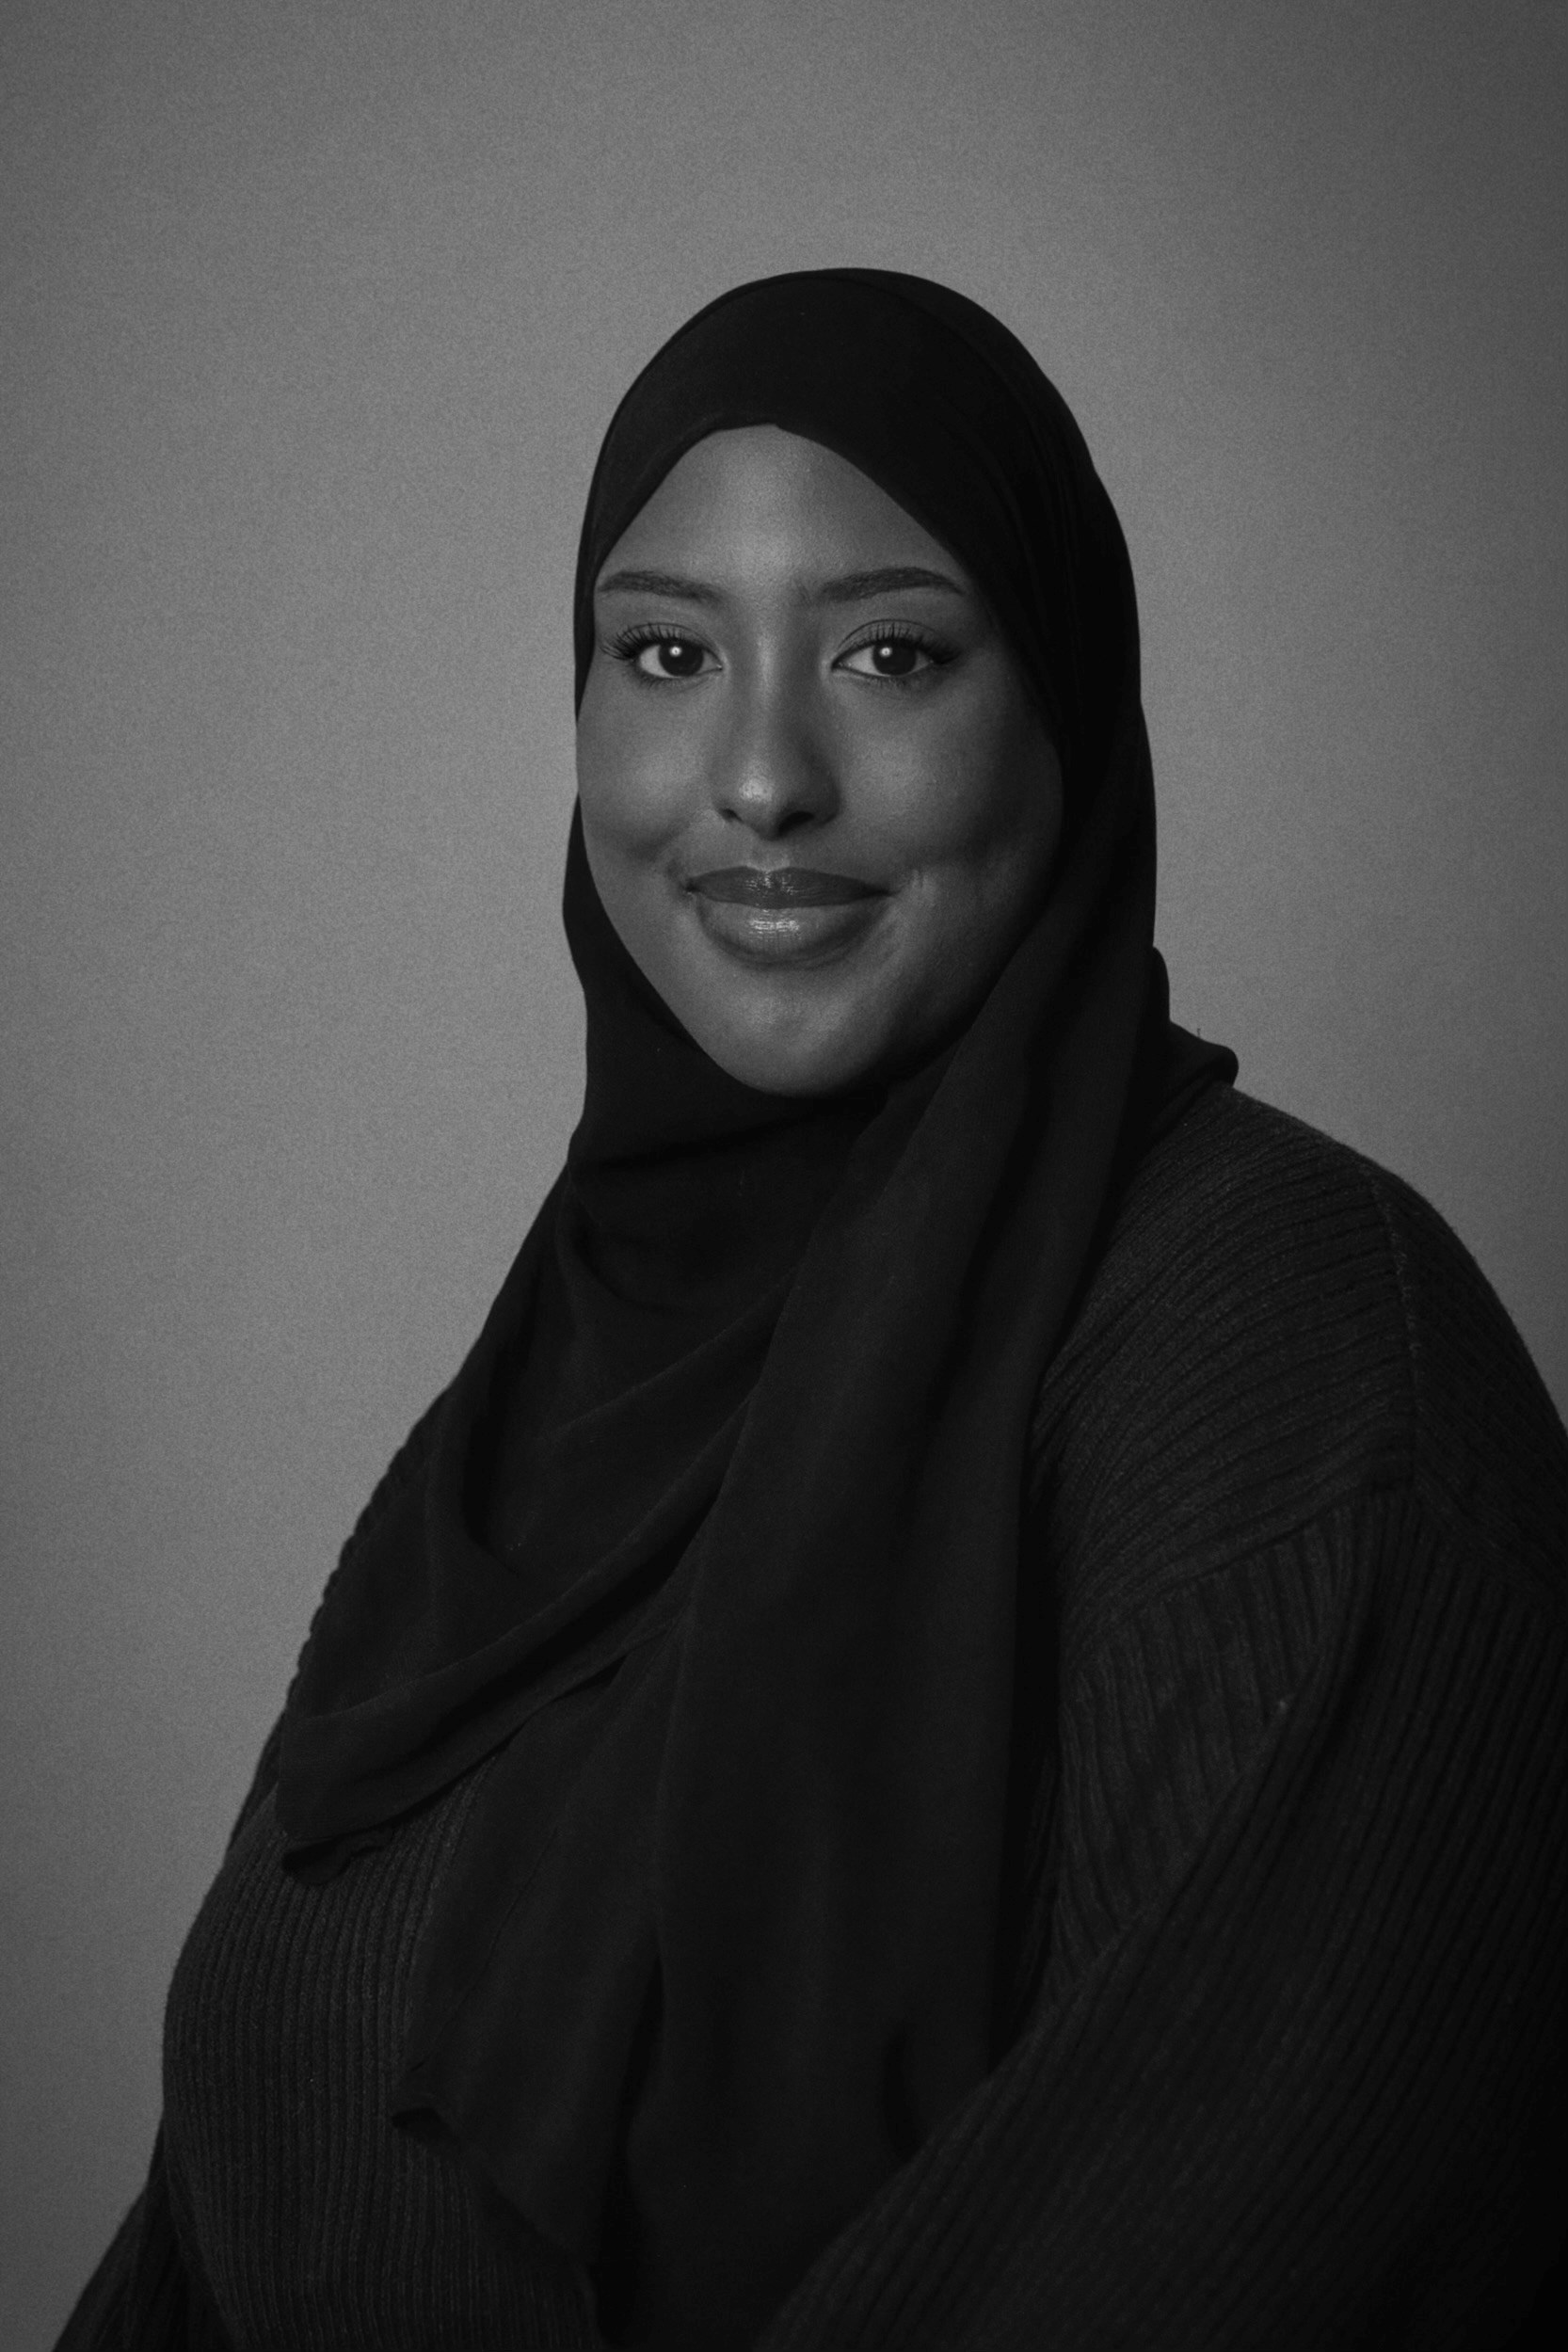 A headshot featuring a woman of color wearing a hijab and facing the camera.